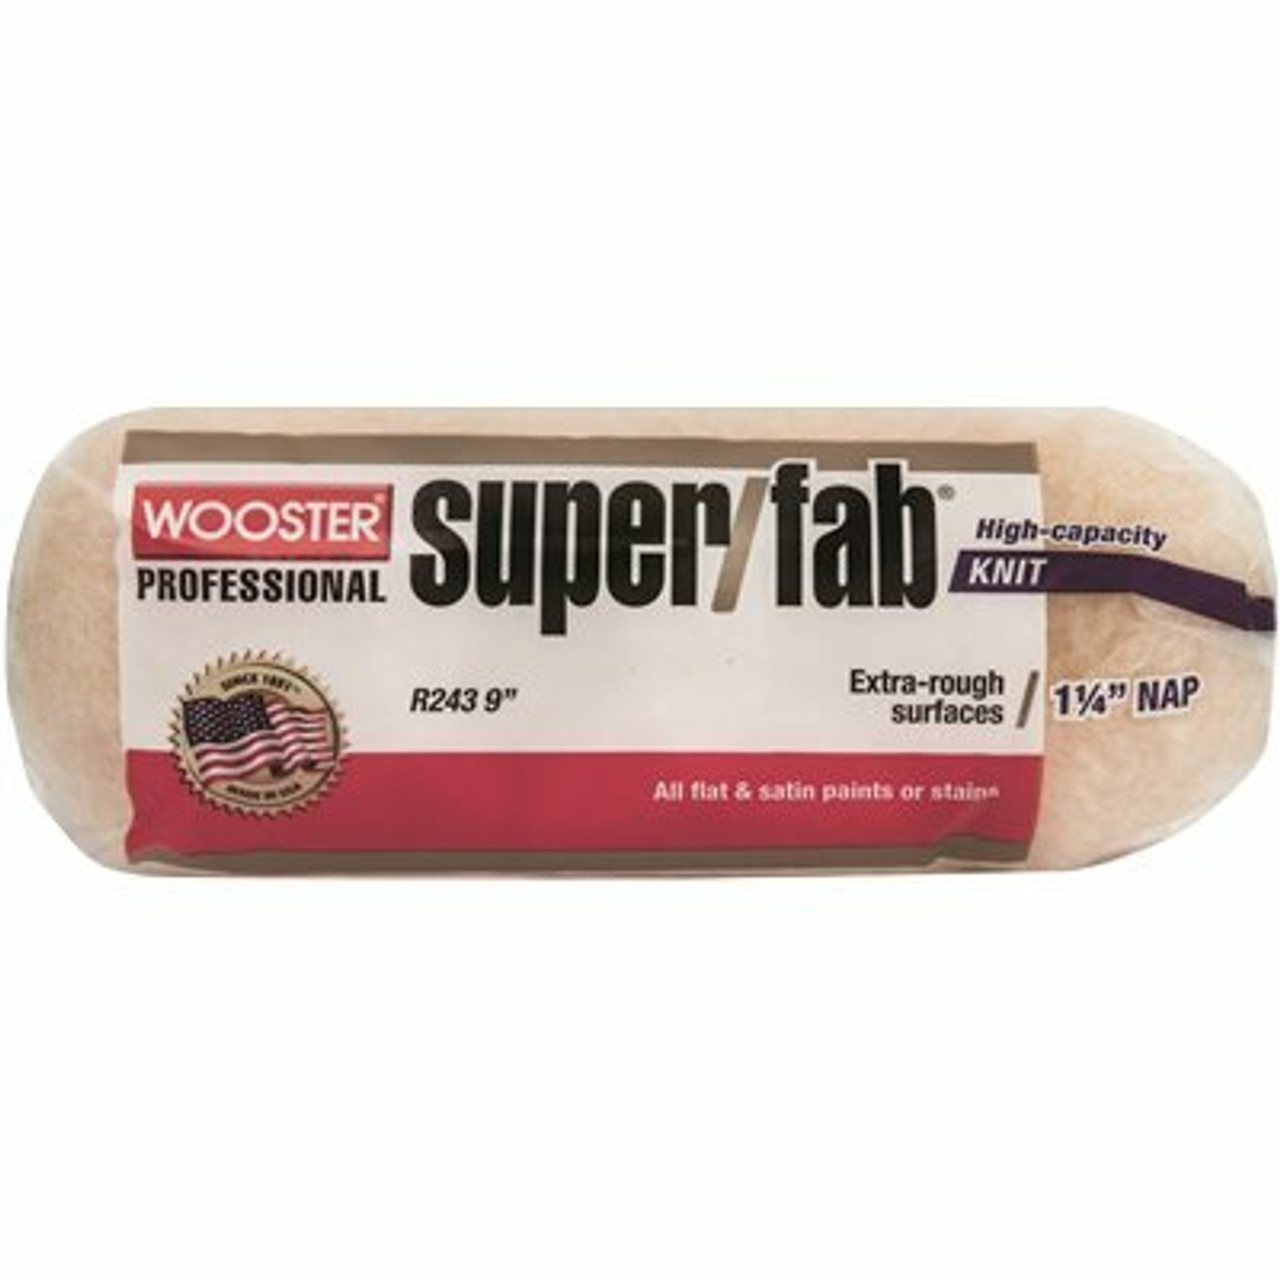 Wooster 9 In. X 1-1/4 In. Pro Super/Fab High-Density Knit Roller Cover